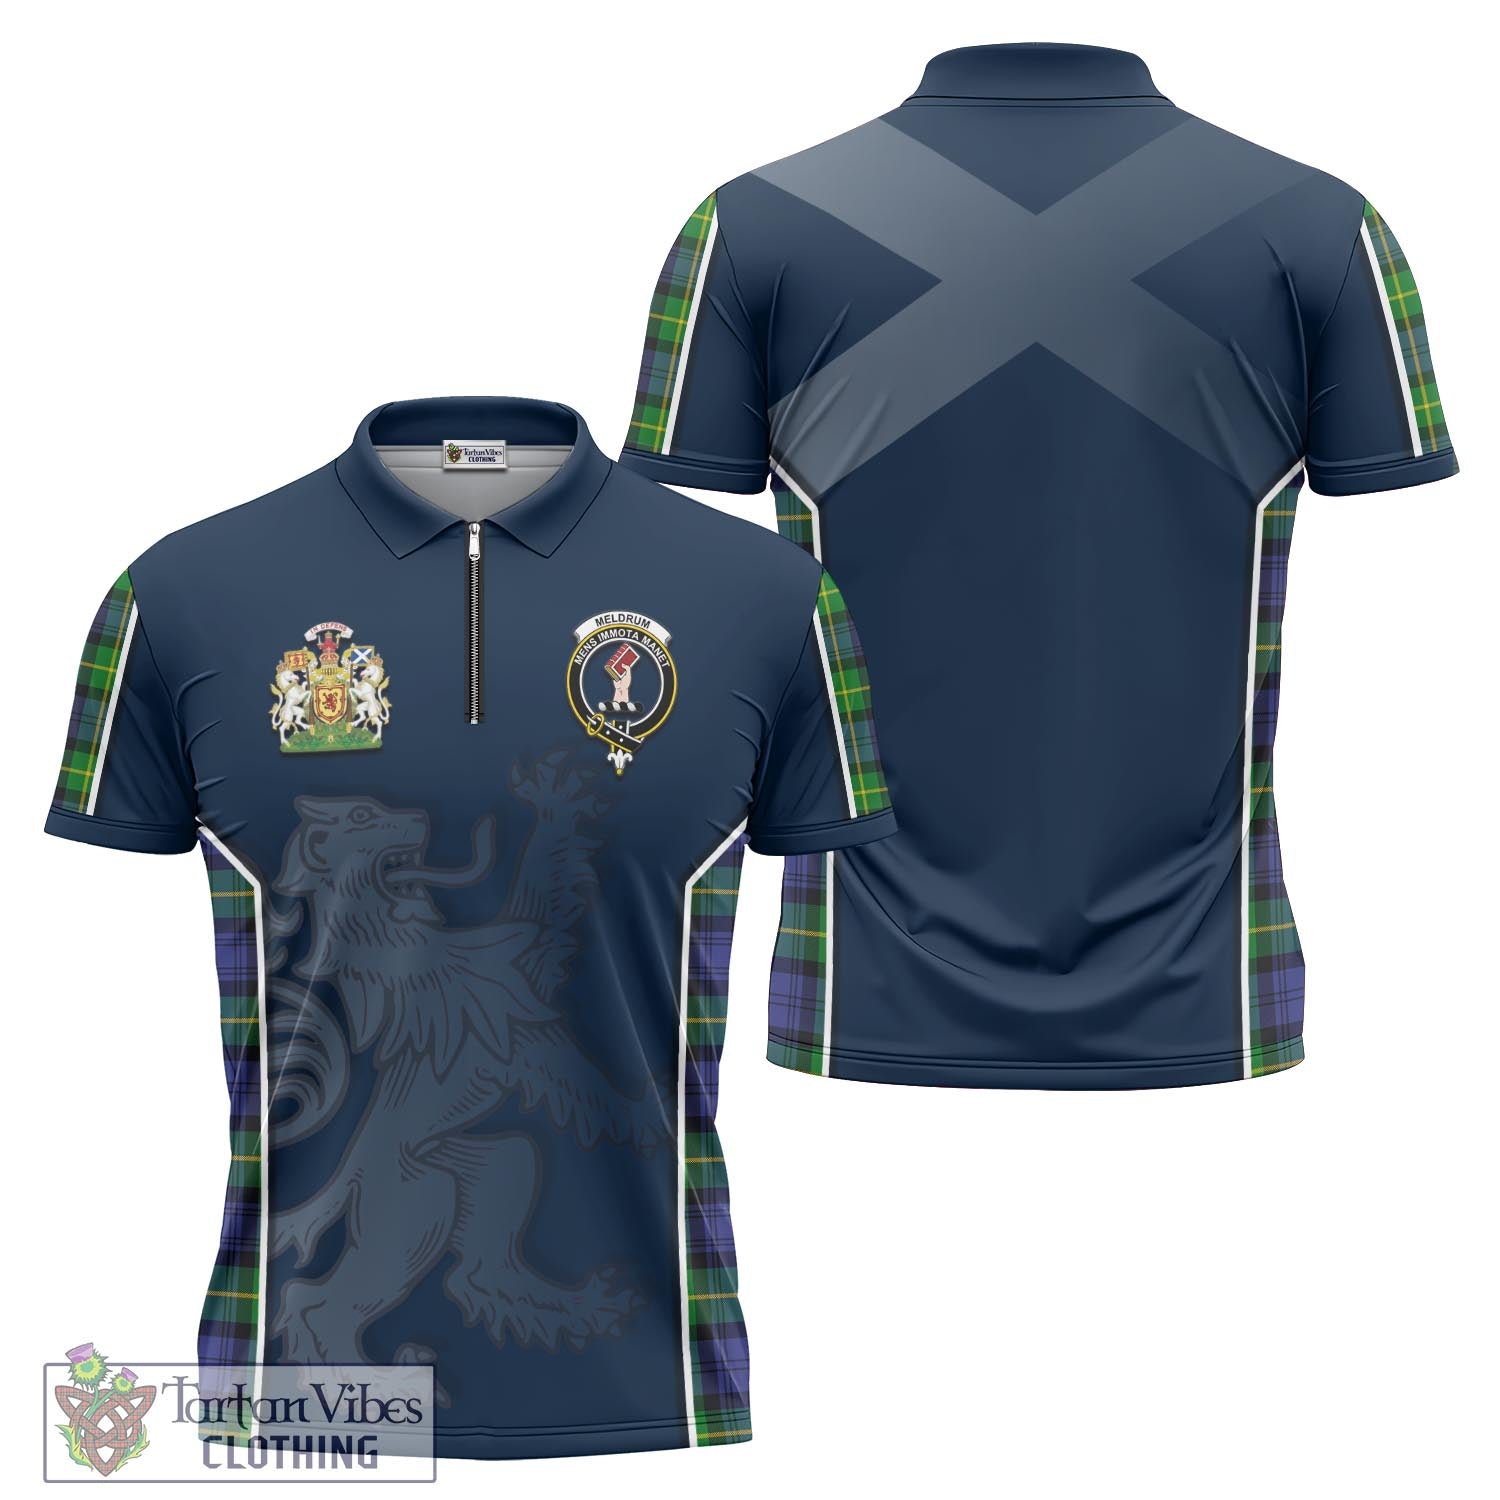 Tartan Vibes Clothing Meldrum Tartan Zipper Polo Shirt with Family Crest and Lion Rampant Vibes Sport Style